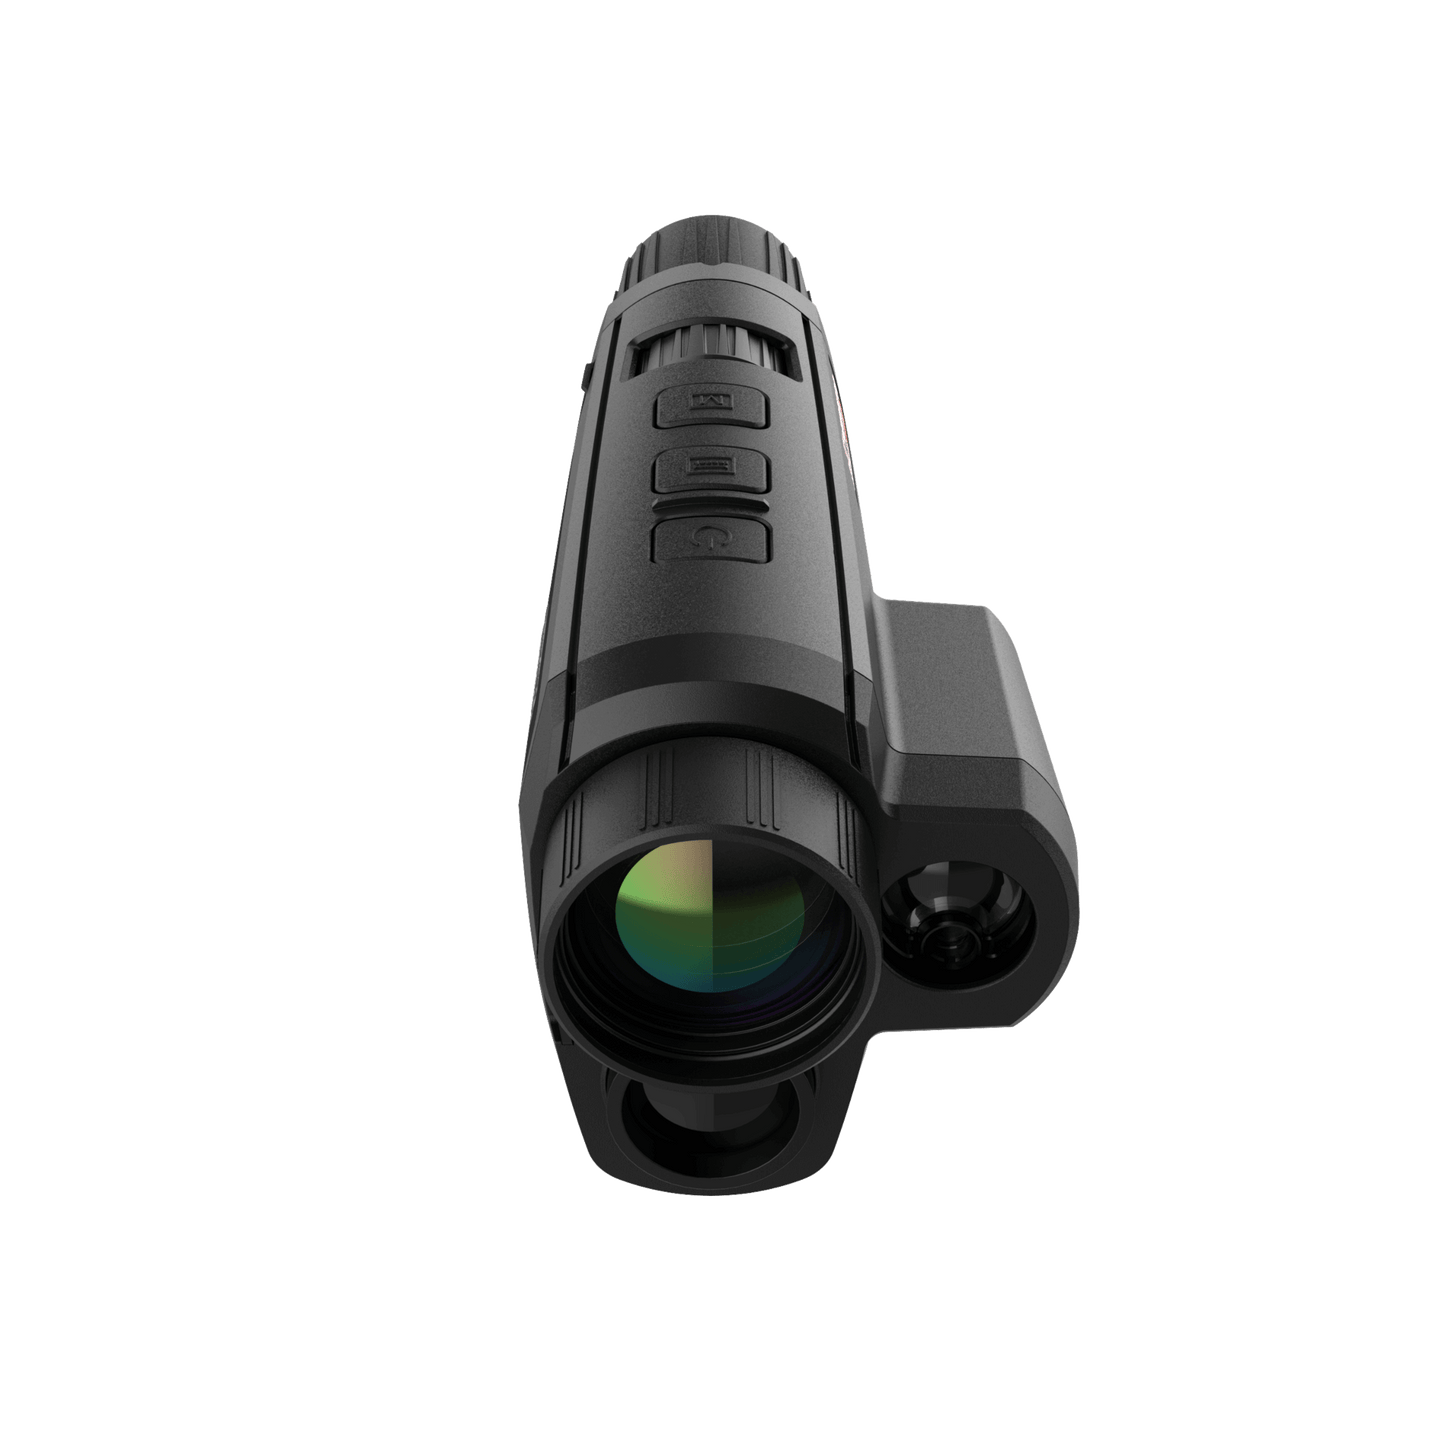 Cape Thermal imaging monocular for sale - HikMicro Gryphon GH35L Handheld thermal monocular front view from above